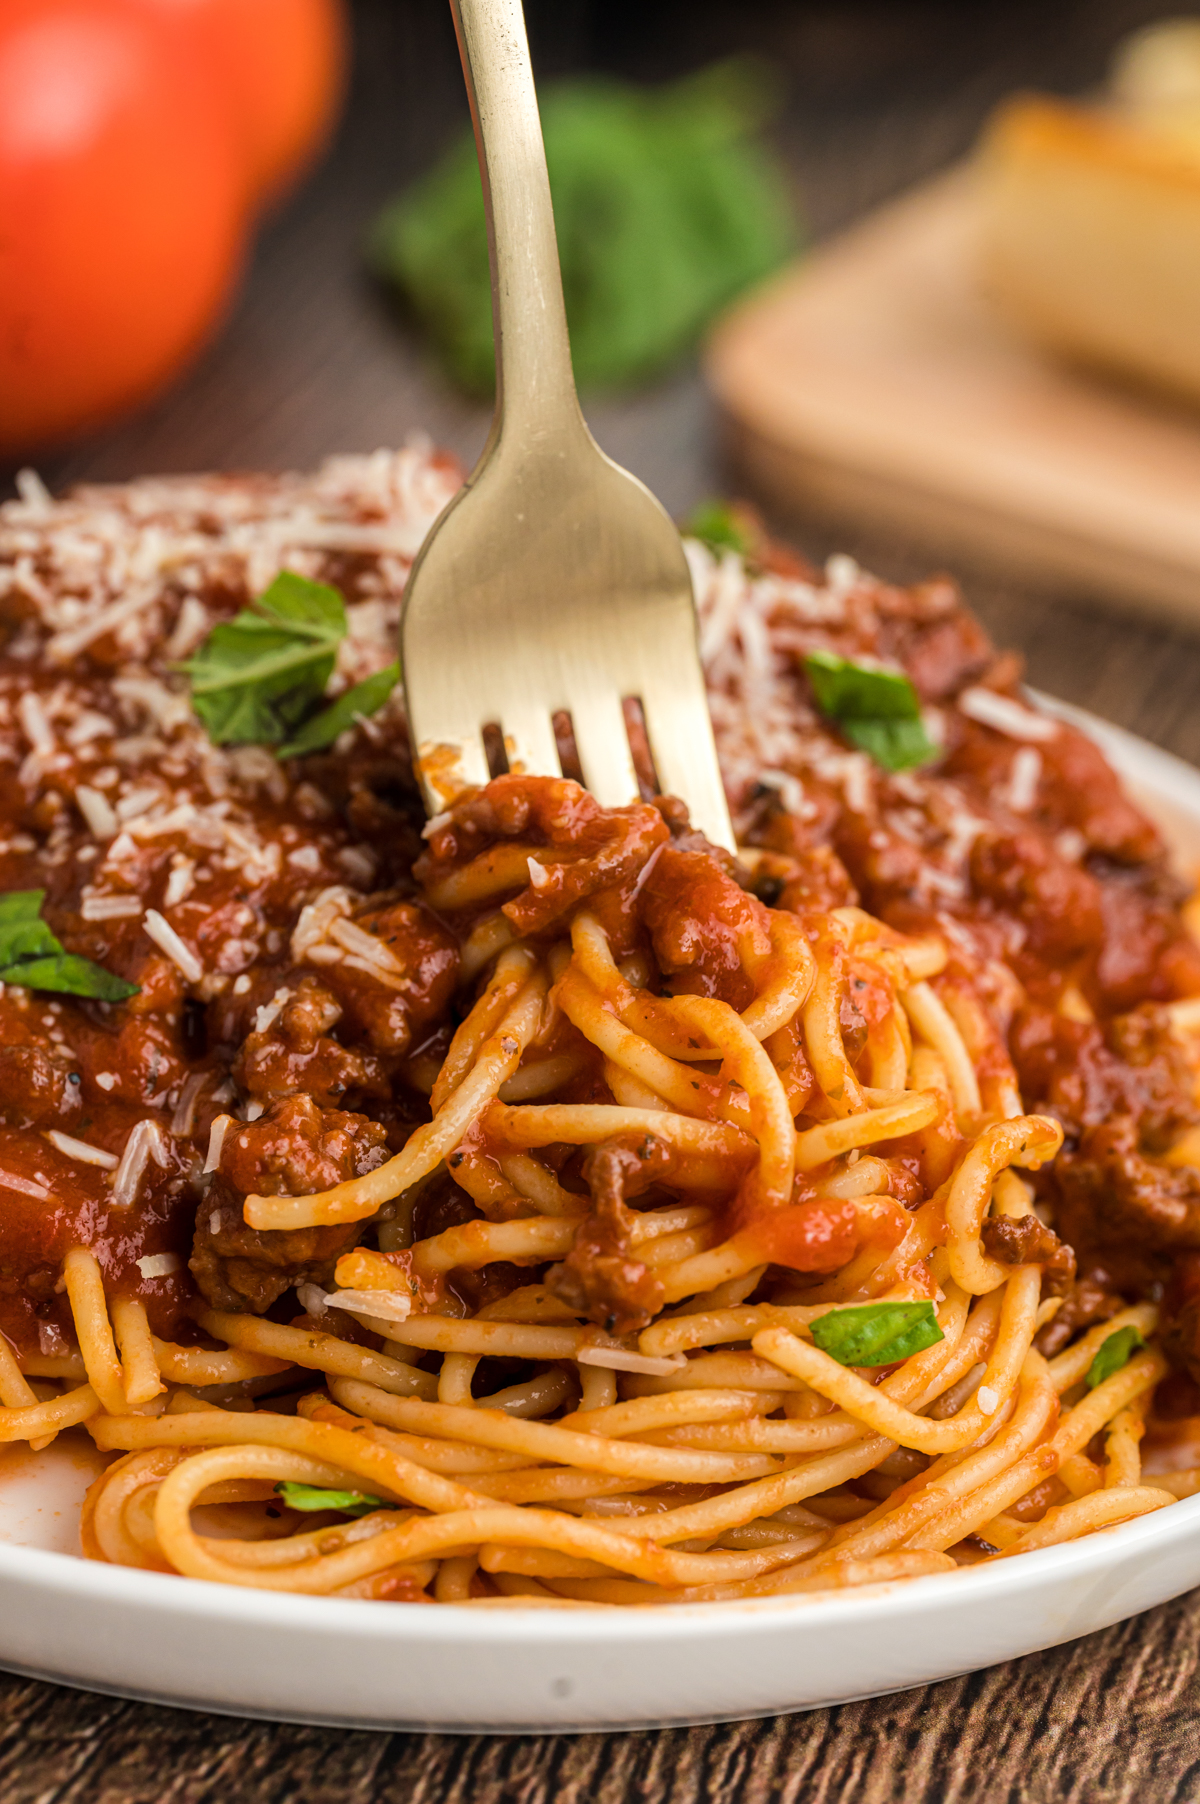 Spaghetti bolognese on a plate with a fork in it.